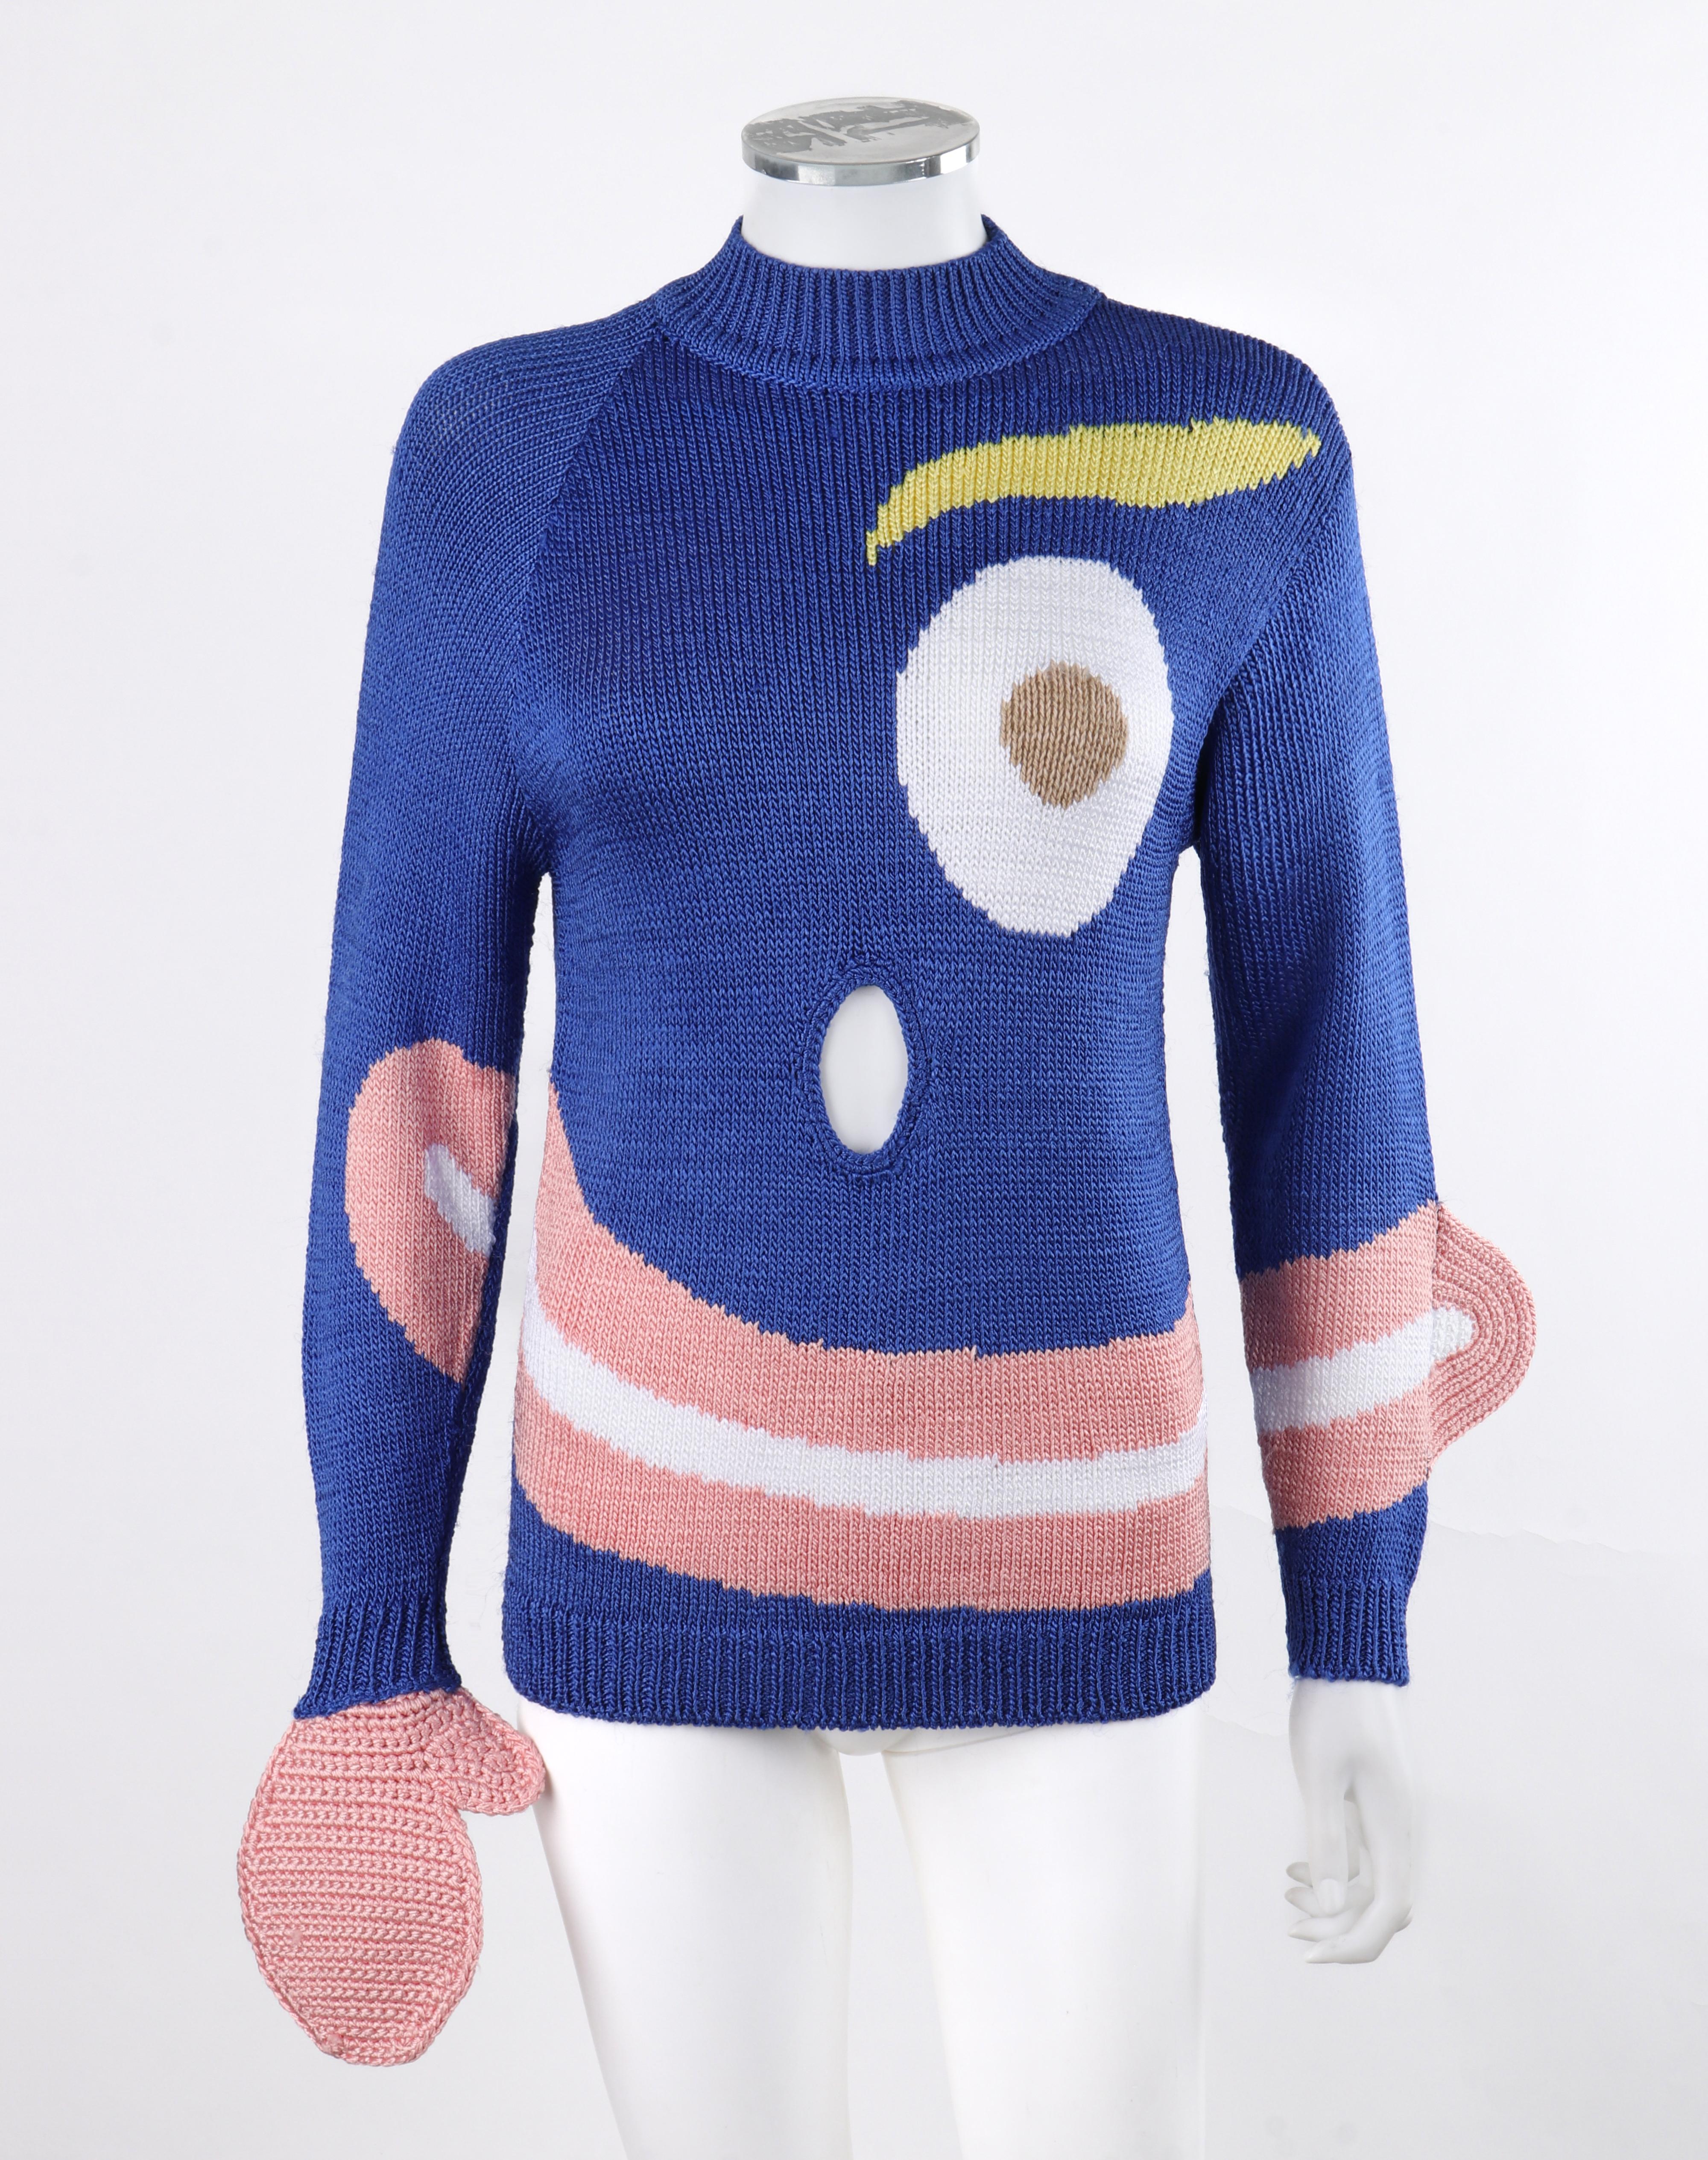 Women's or Men's SURVIVAL OF THE FASHIONEST S/S 2020 Blue Knit Smiley Face Pullover Sweater Top S For Sale